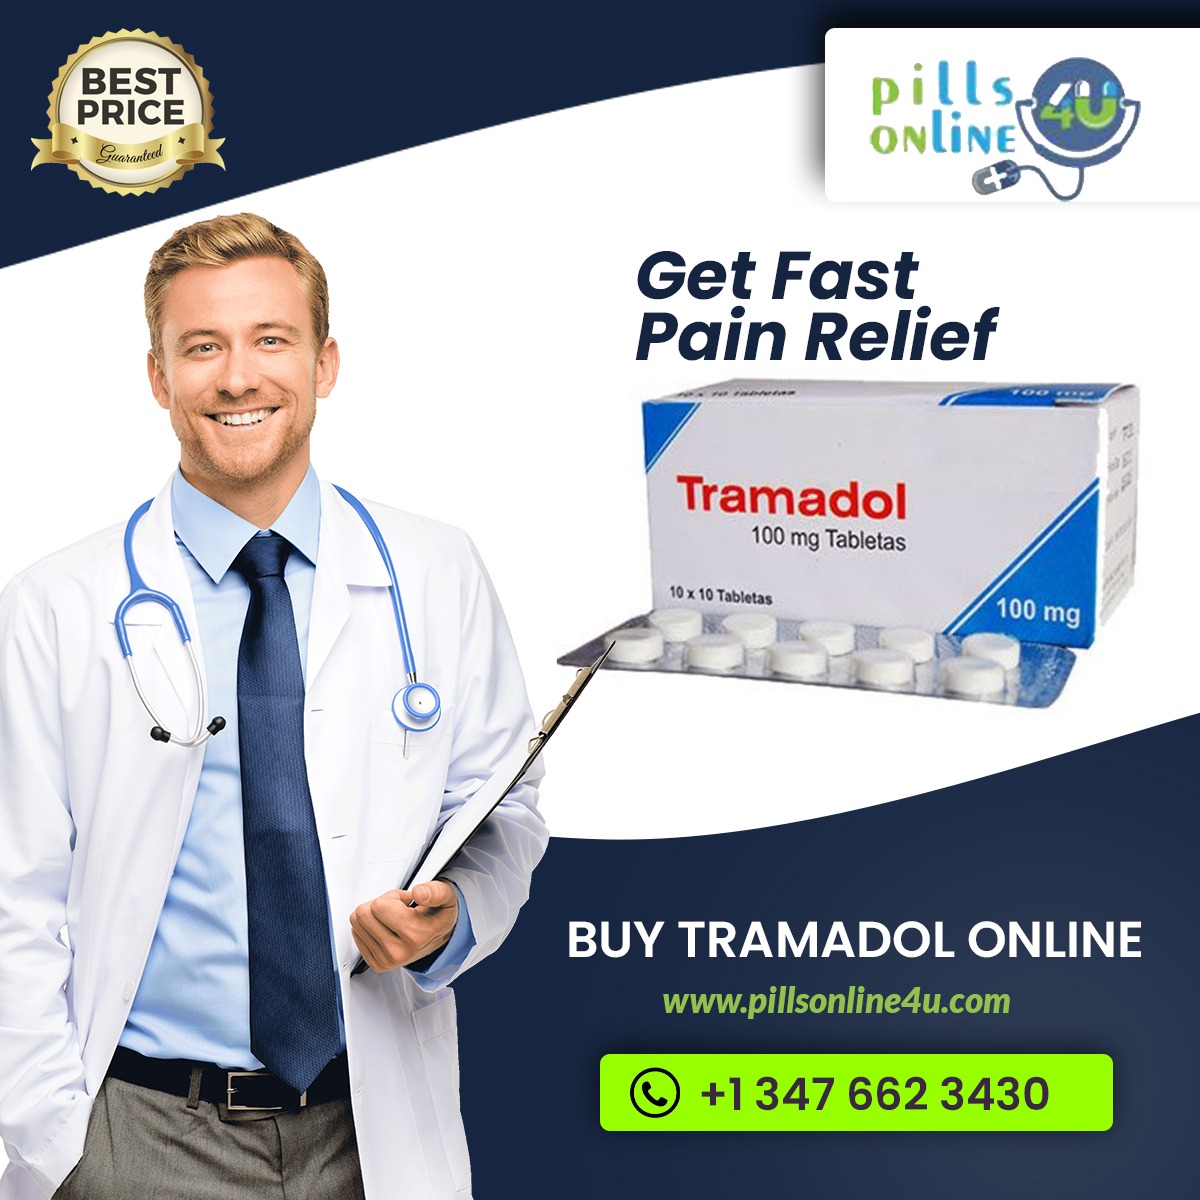 Where can I buy Tramadol online in the USA